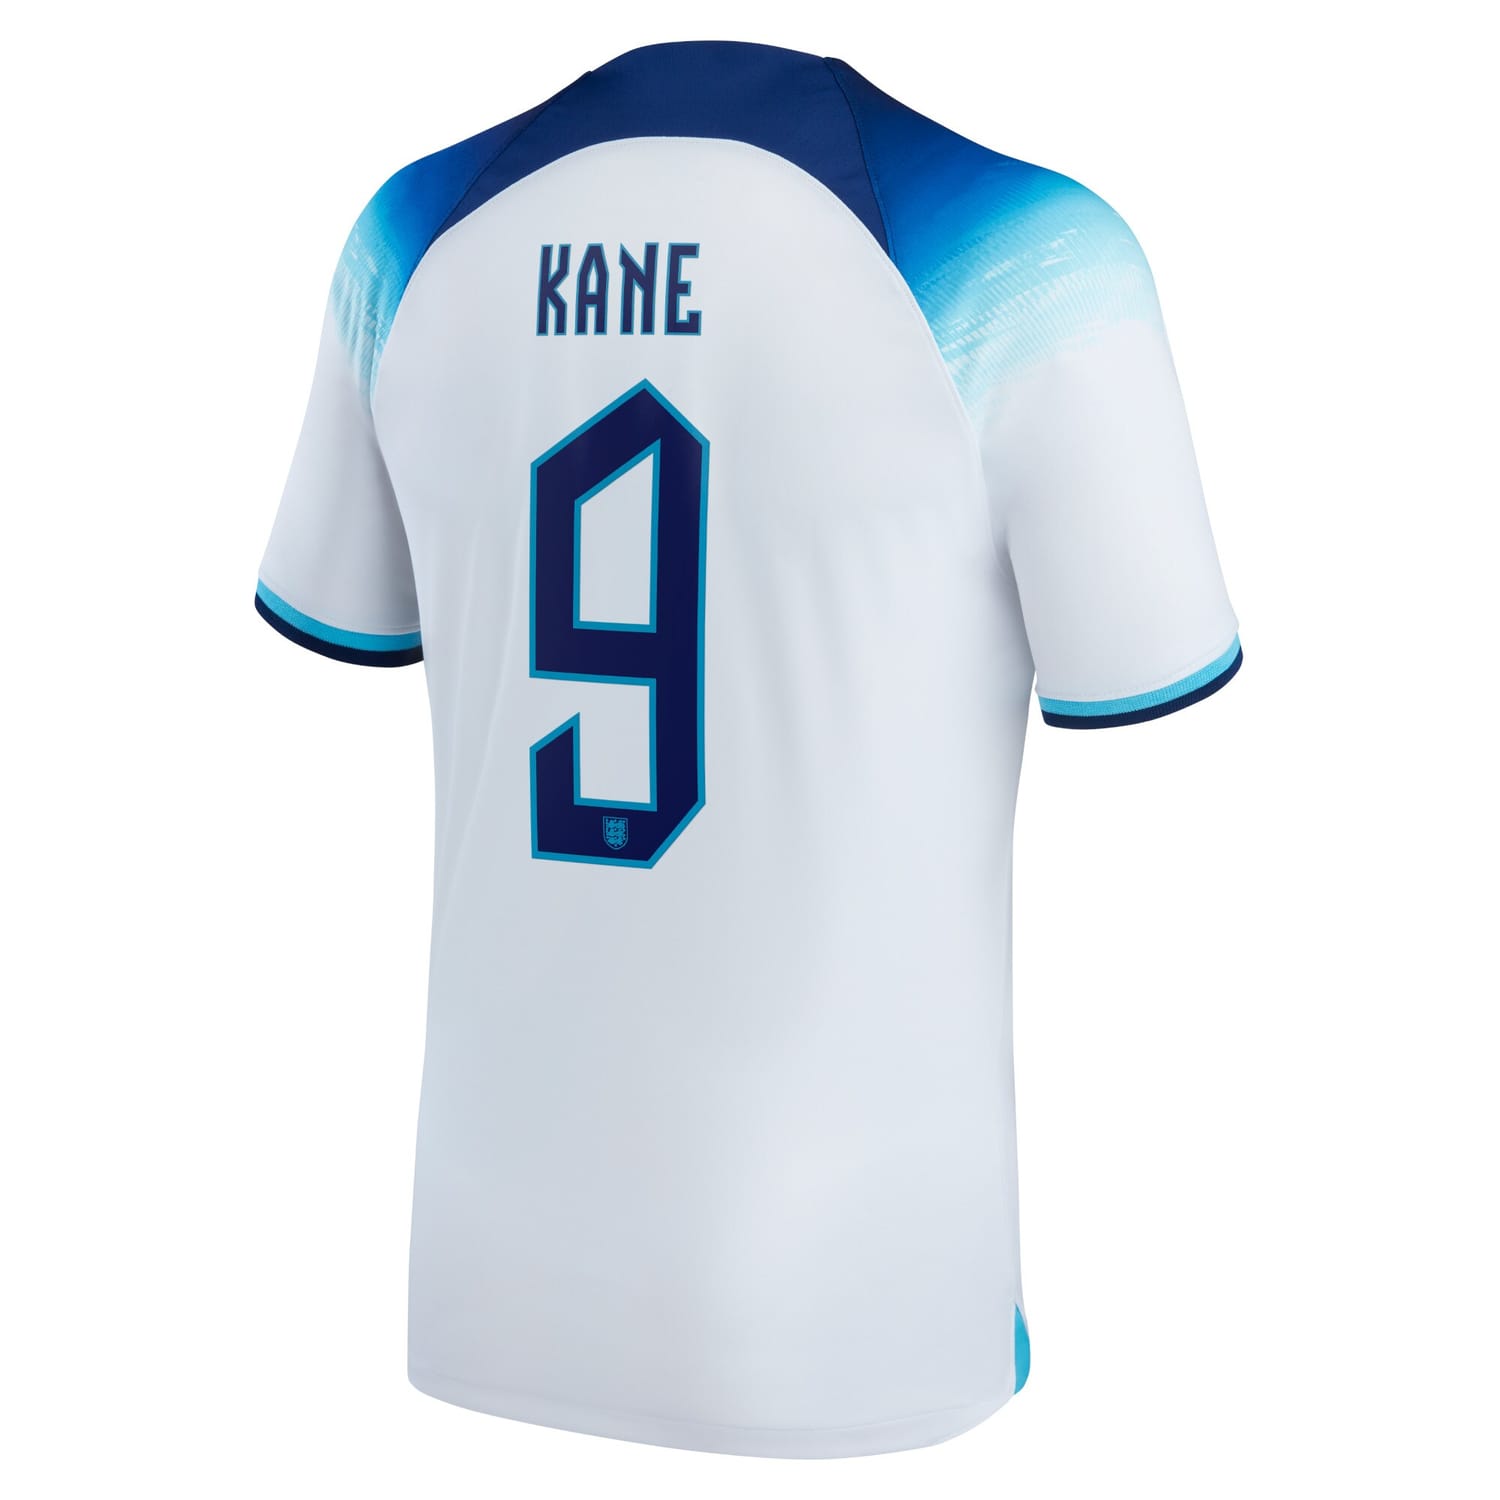 England National Team Home Jersey Shirt White 2022-23 player Harry Kane printing for Men